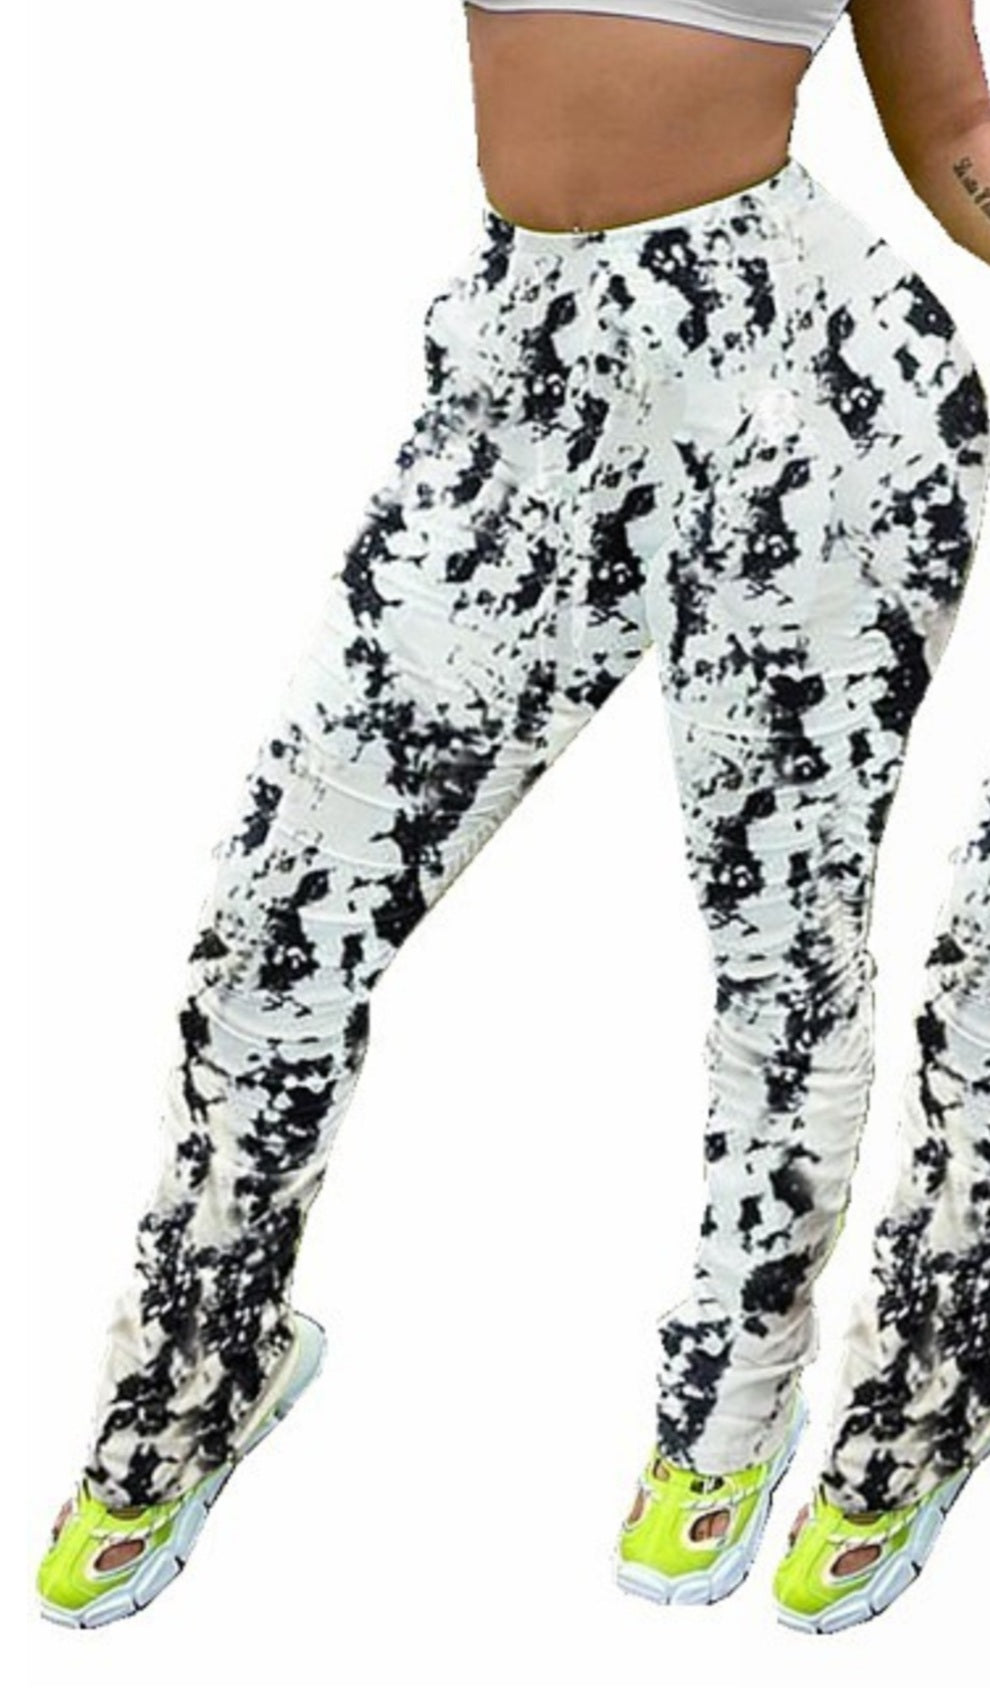 Pleated/Runched printed Pants